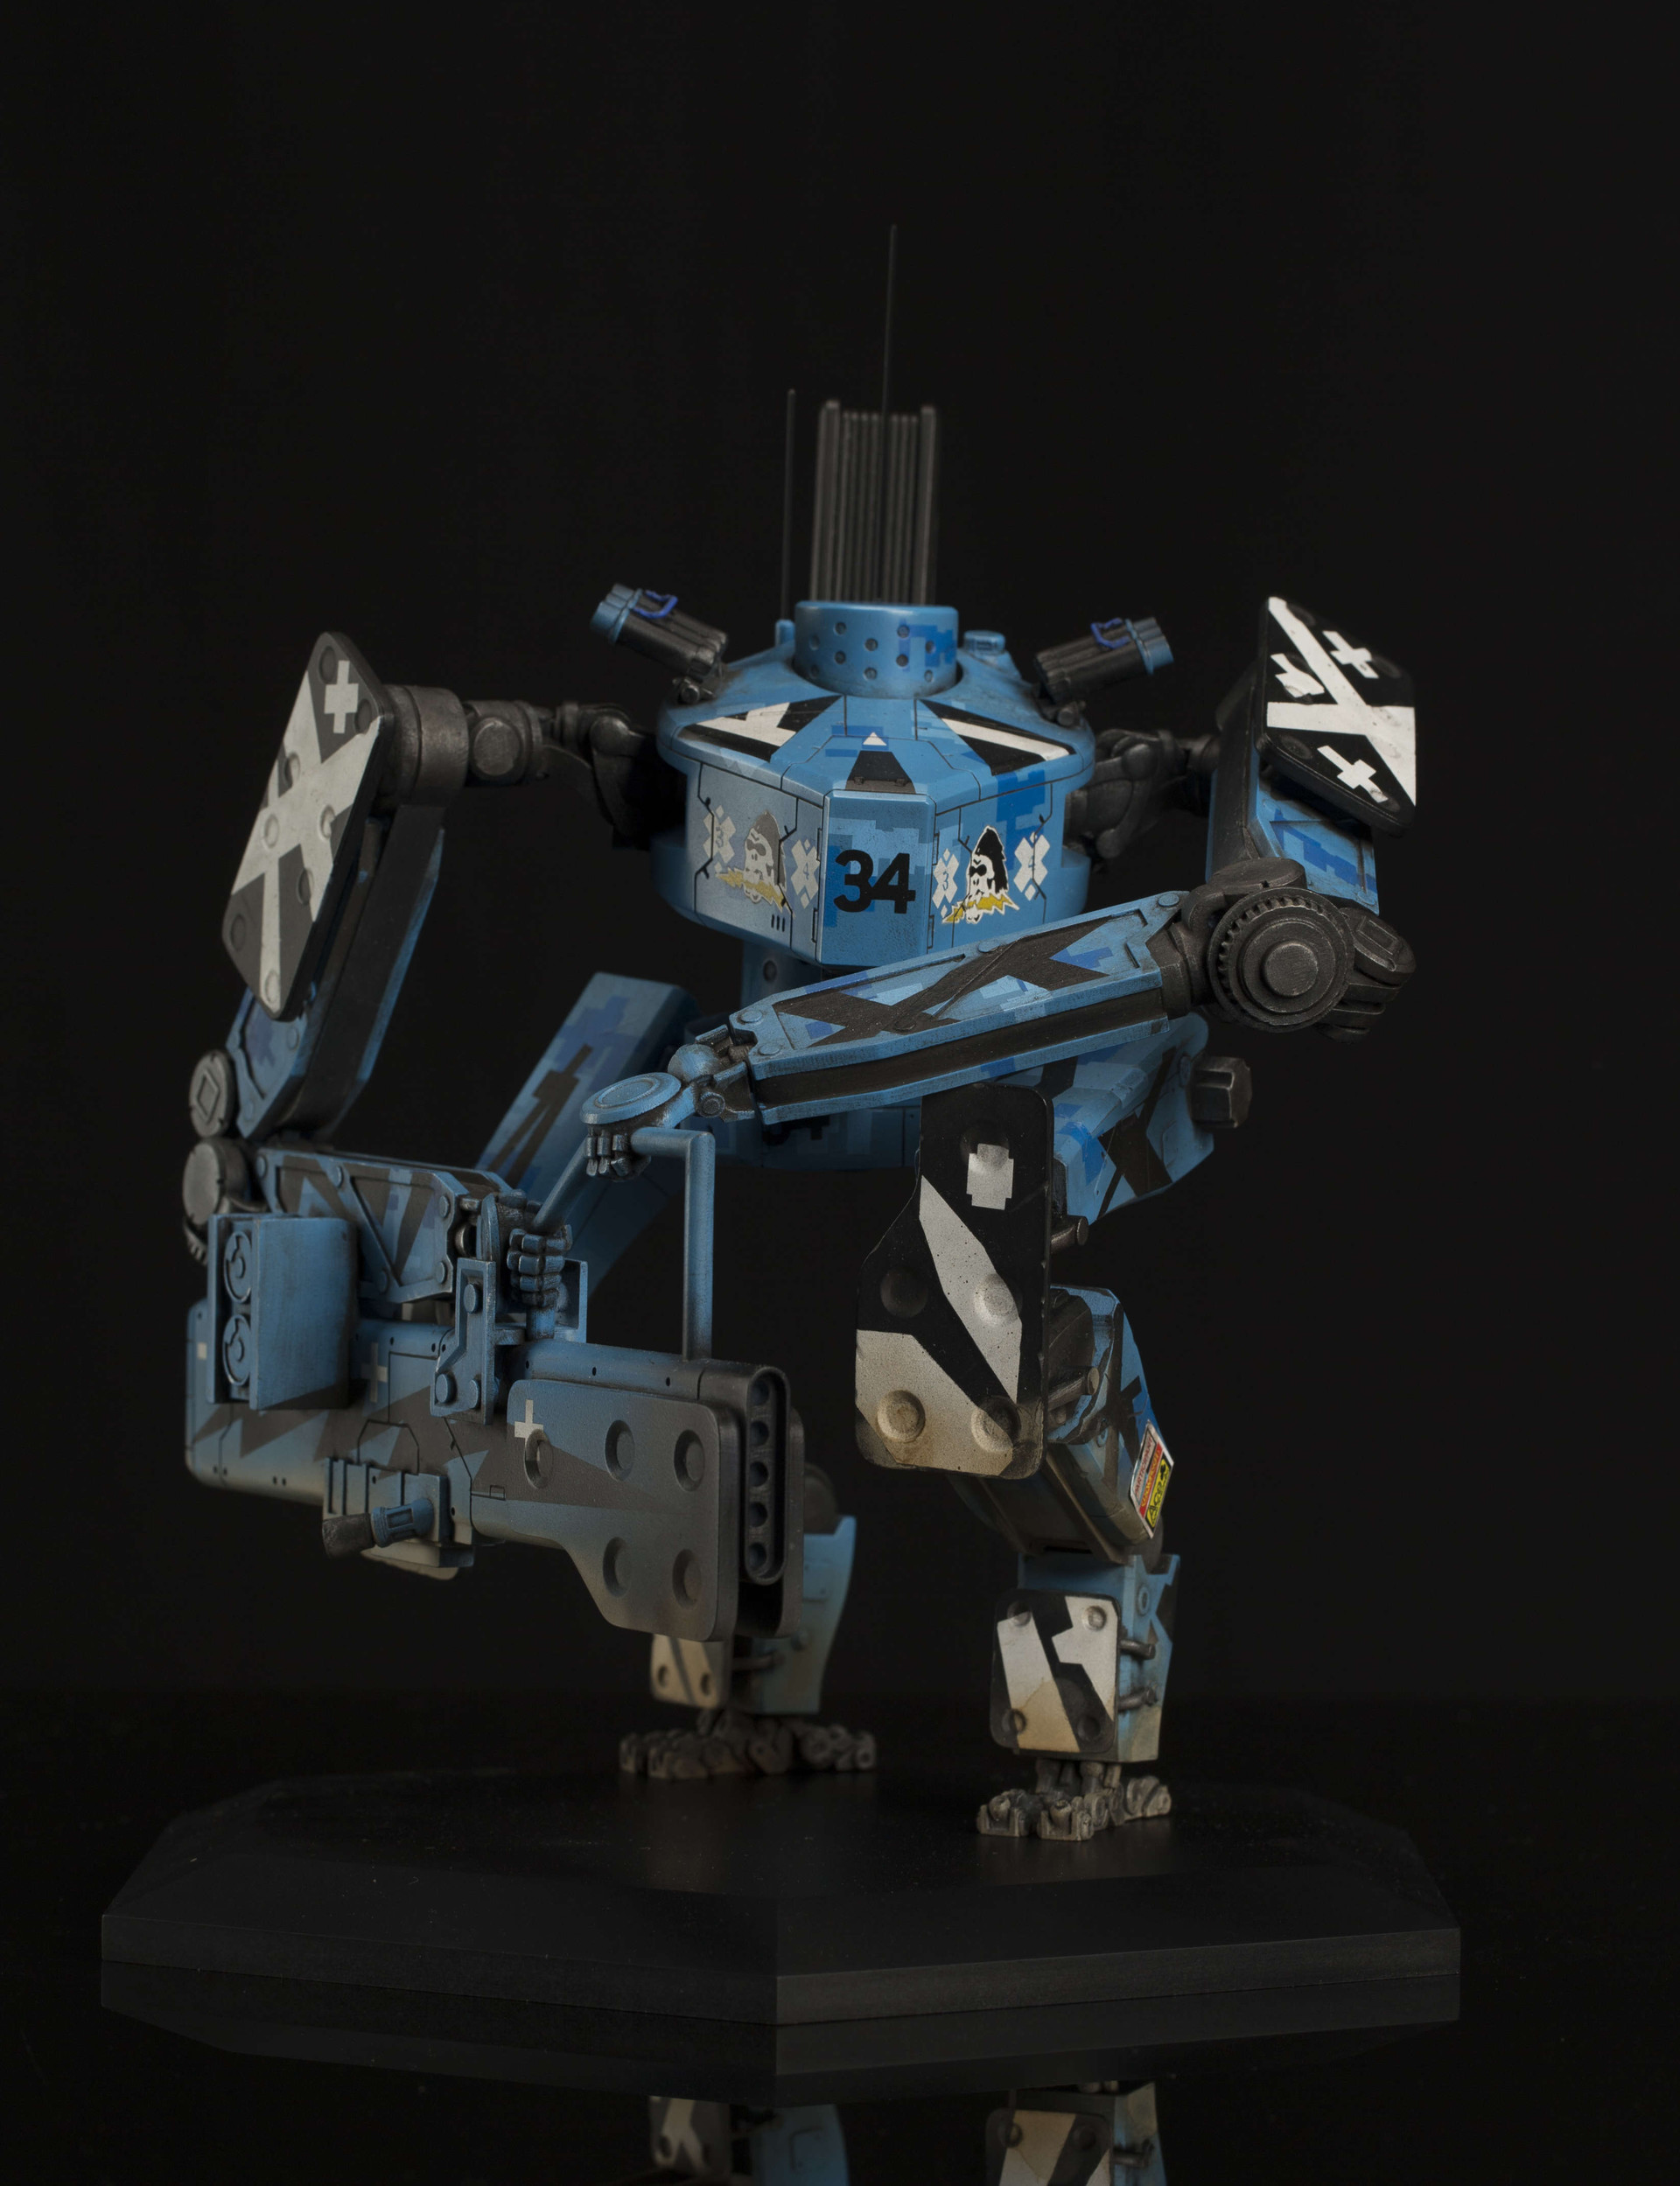 Fine Art: Hope You Like Pictures Of Giant Combat Mechs Because